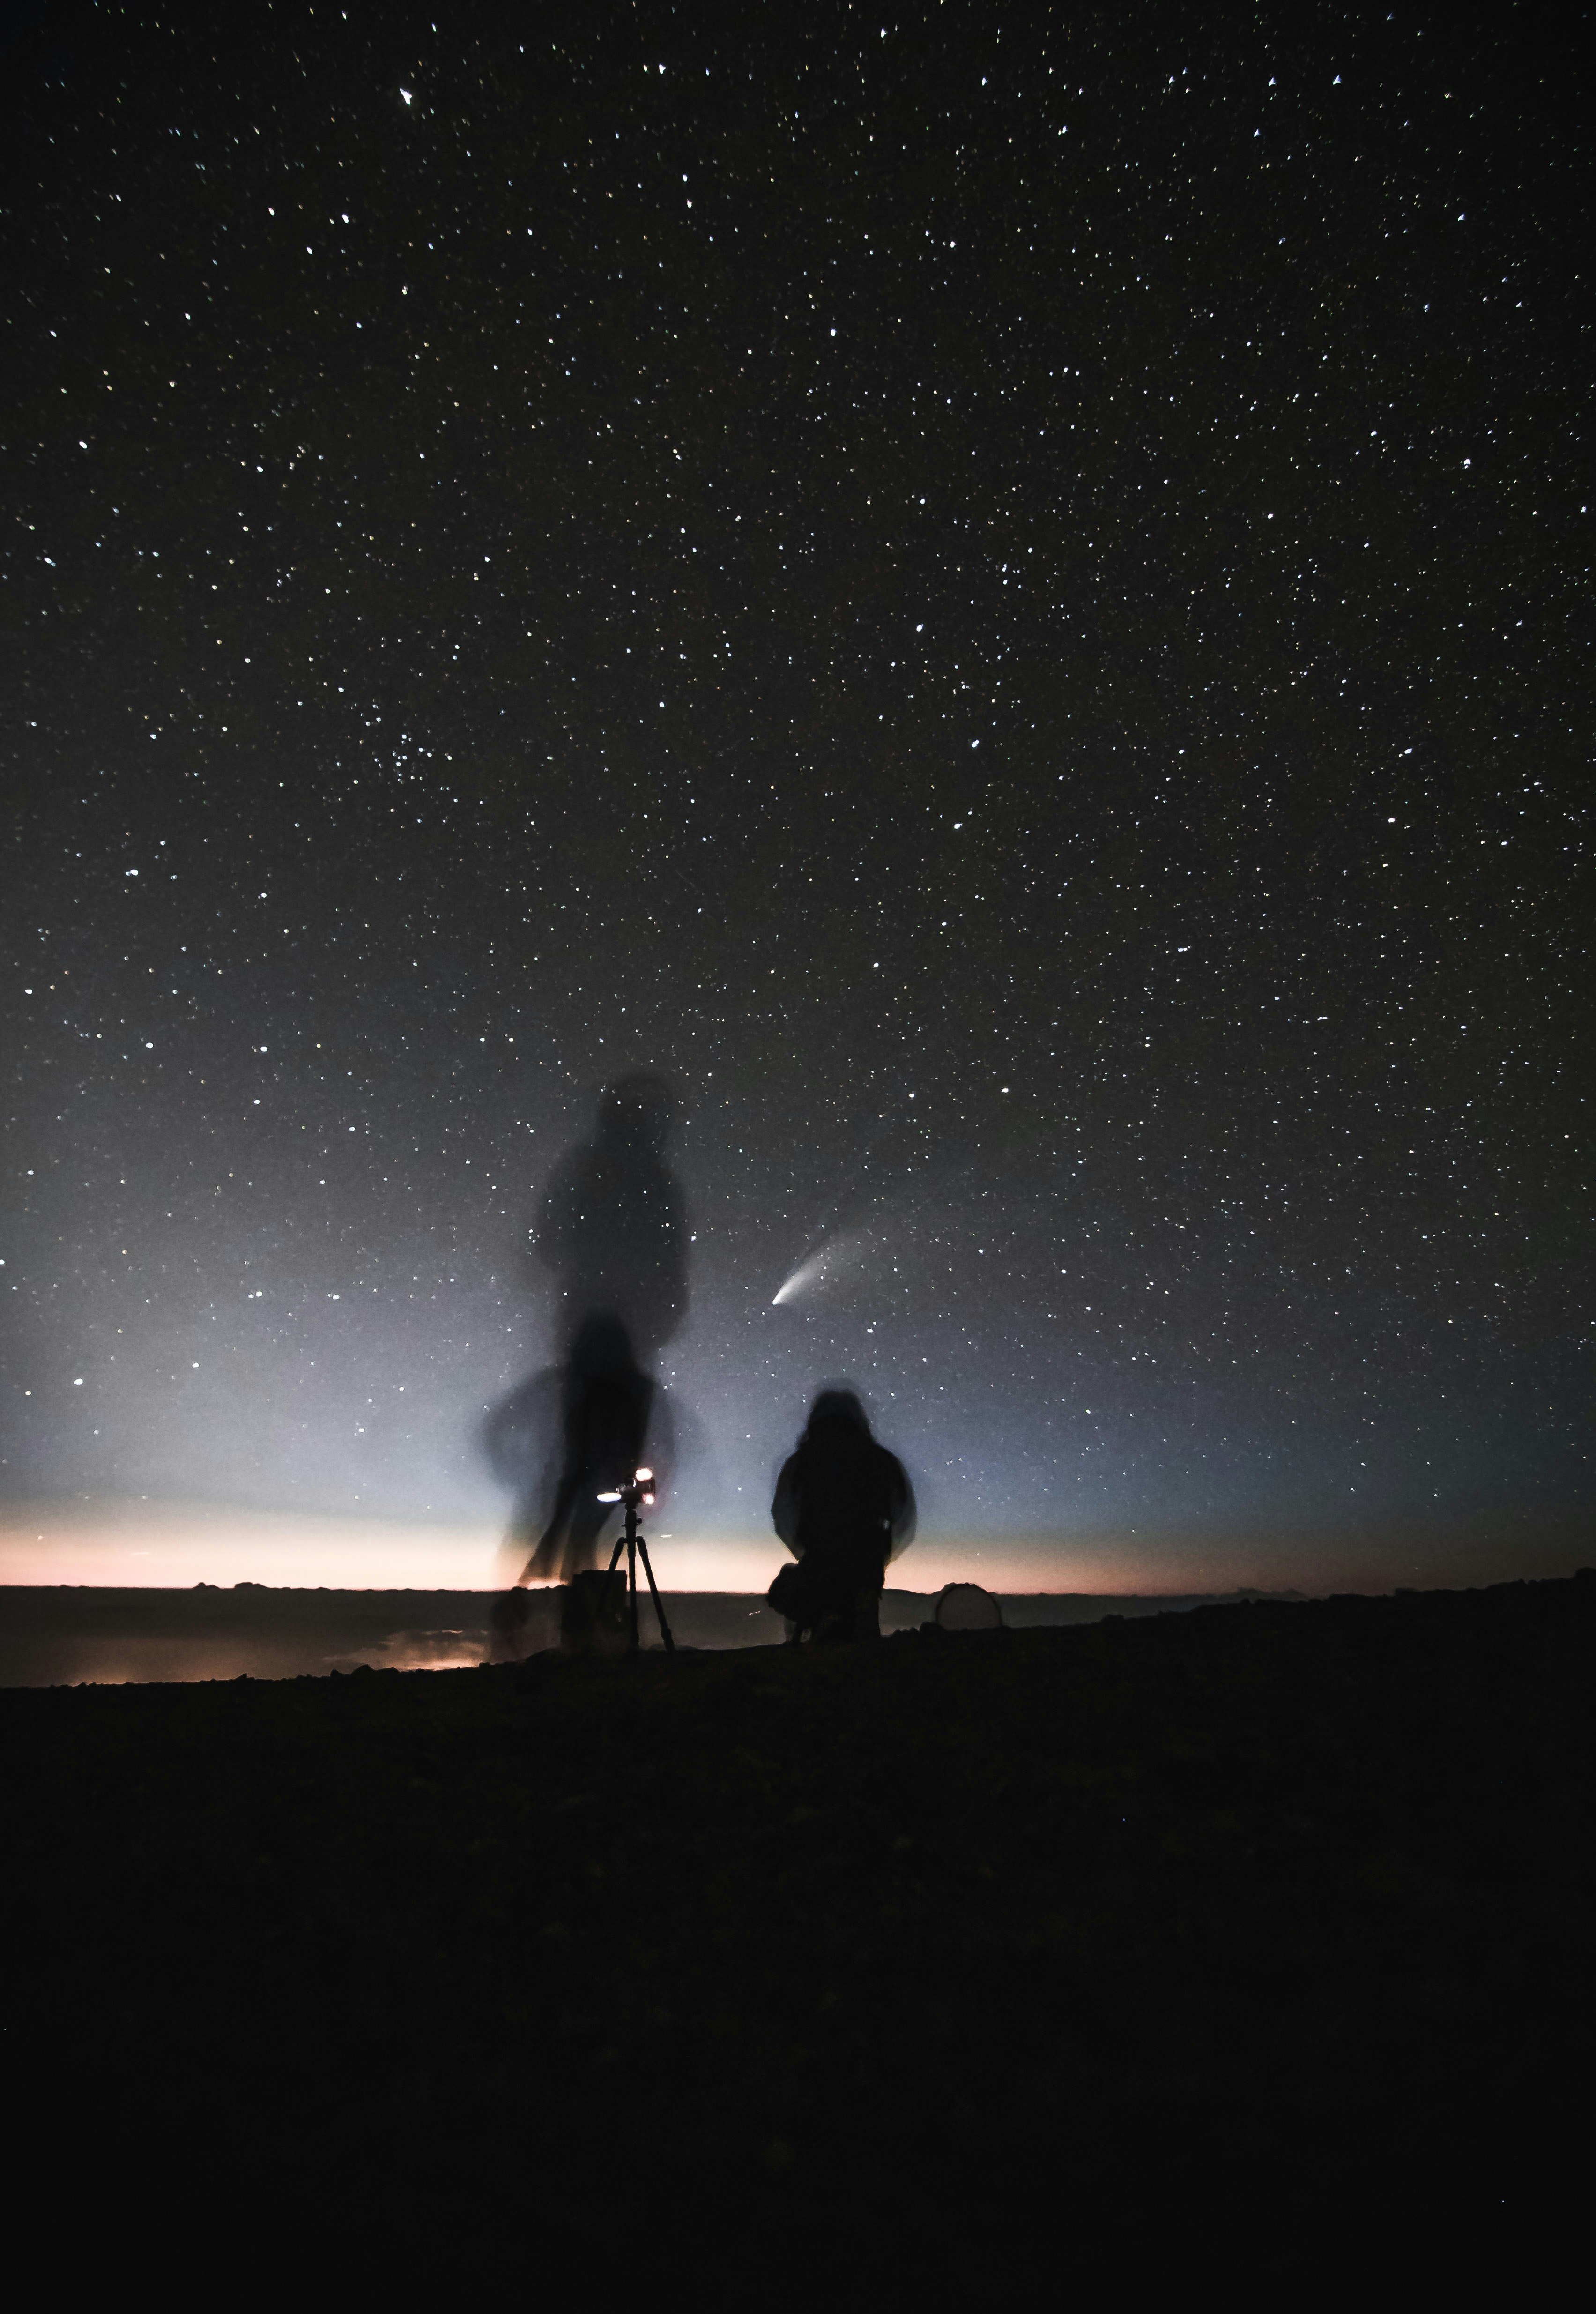 silhouette of 2 person standing on hill during night time